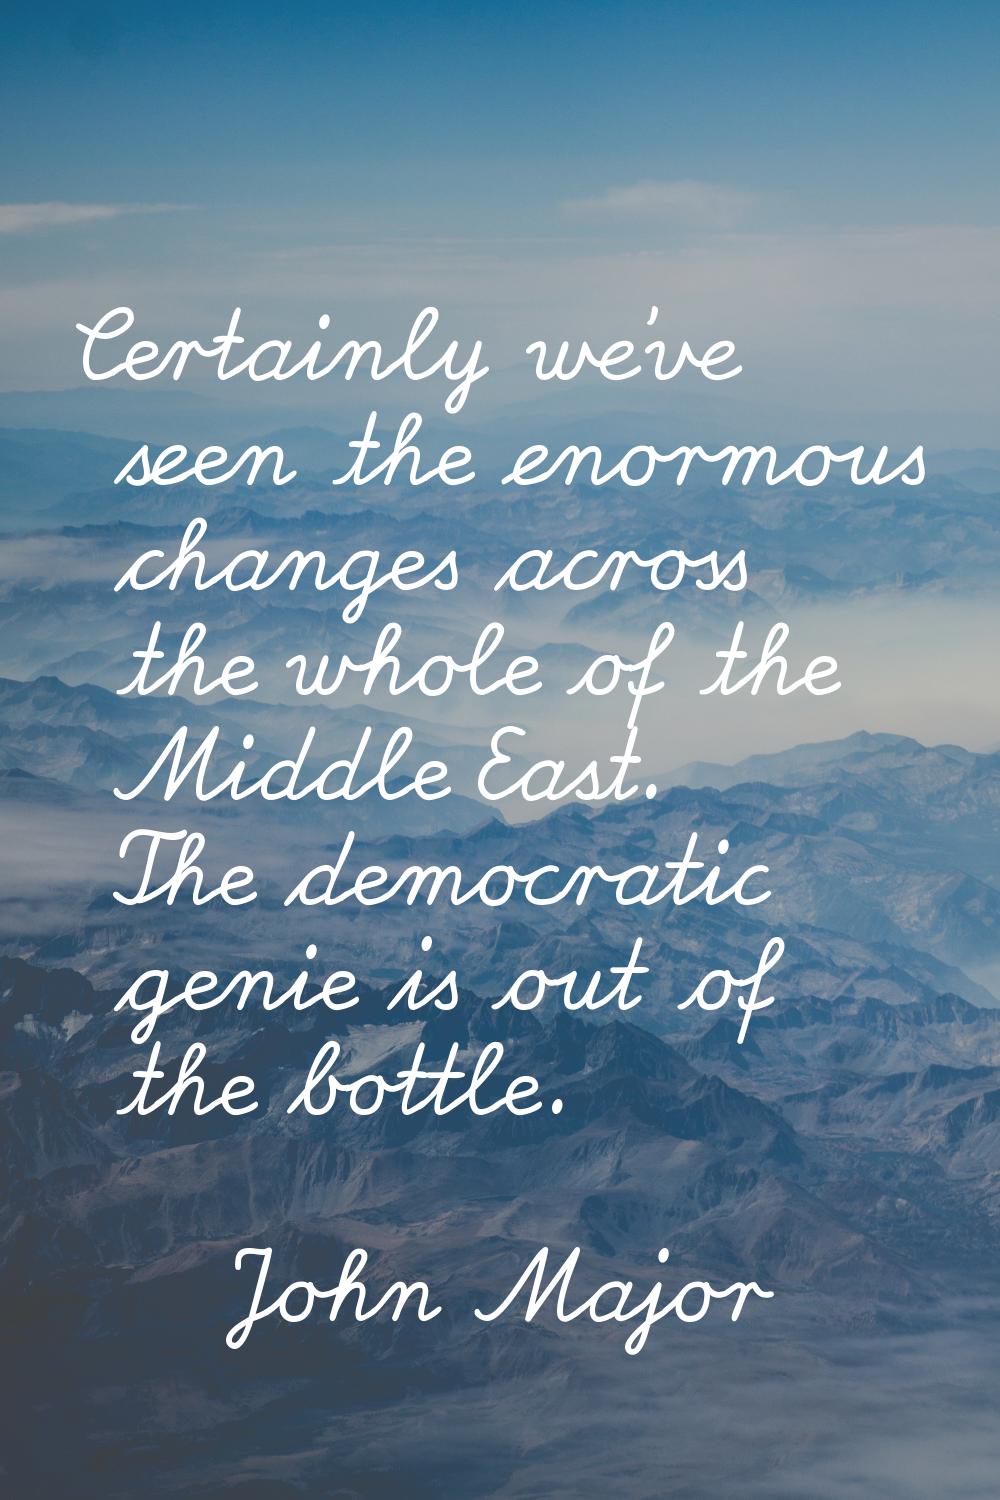 Certainly we've seen the enormous changes across the whole of the Middle East. The democratic genie